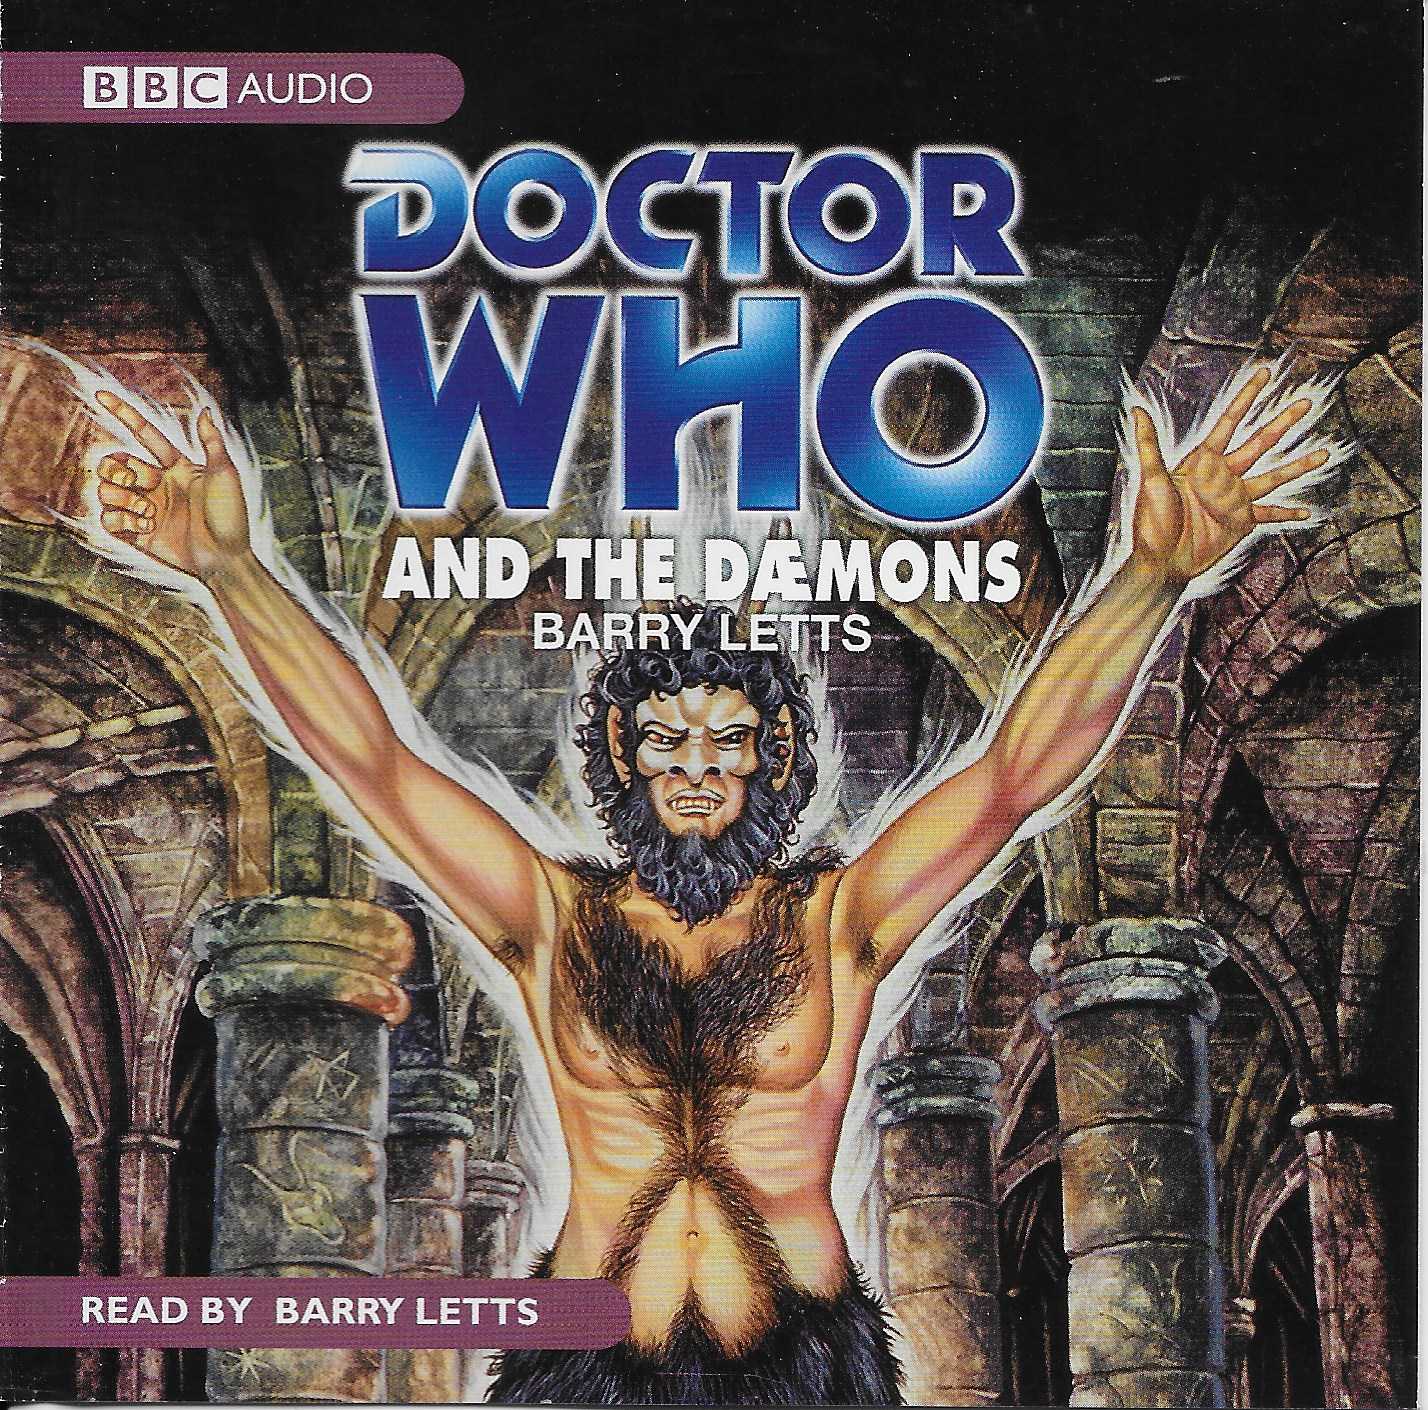 Picture of ISBN 978-1-405-68762-1 Doctor Who - And the Daemons by artist Barry Letts / Guy Leopold from the BBC cds - Records and Tapes library